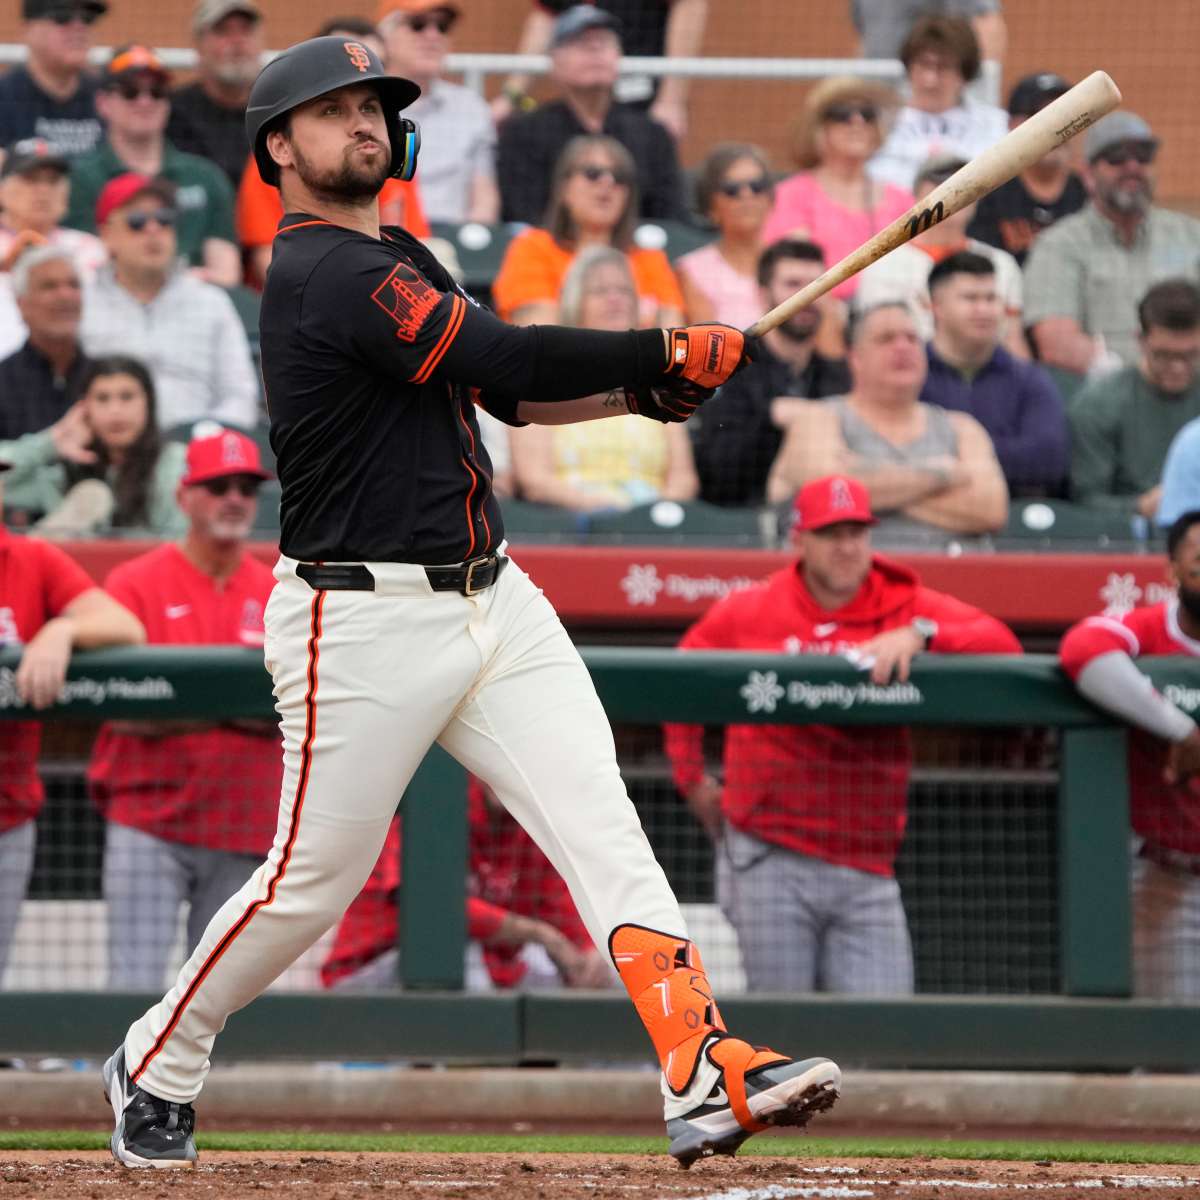 JD Davis, who recently won a $6.9 million arbitration case against the San Francisco Giants, has now been released by the team, making him a free agent.